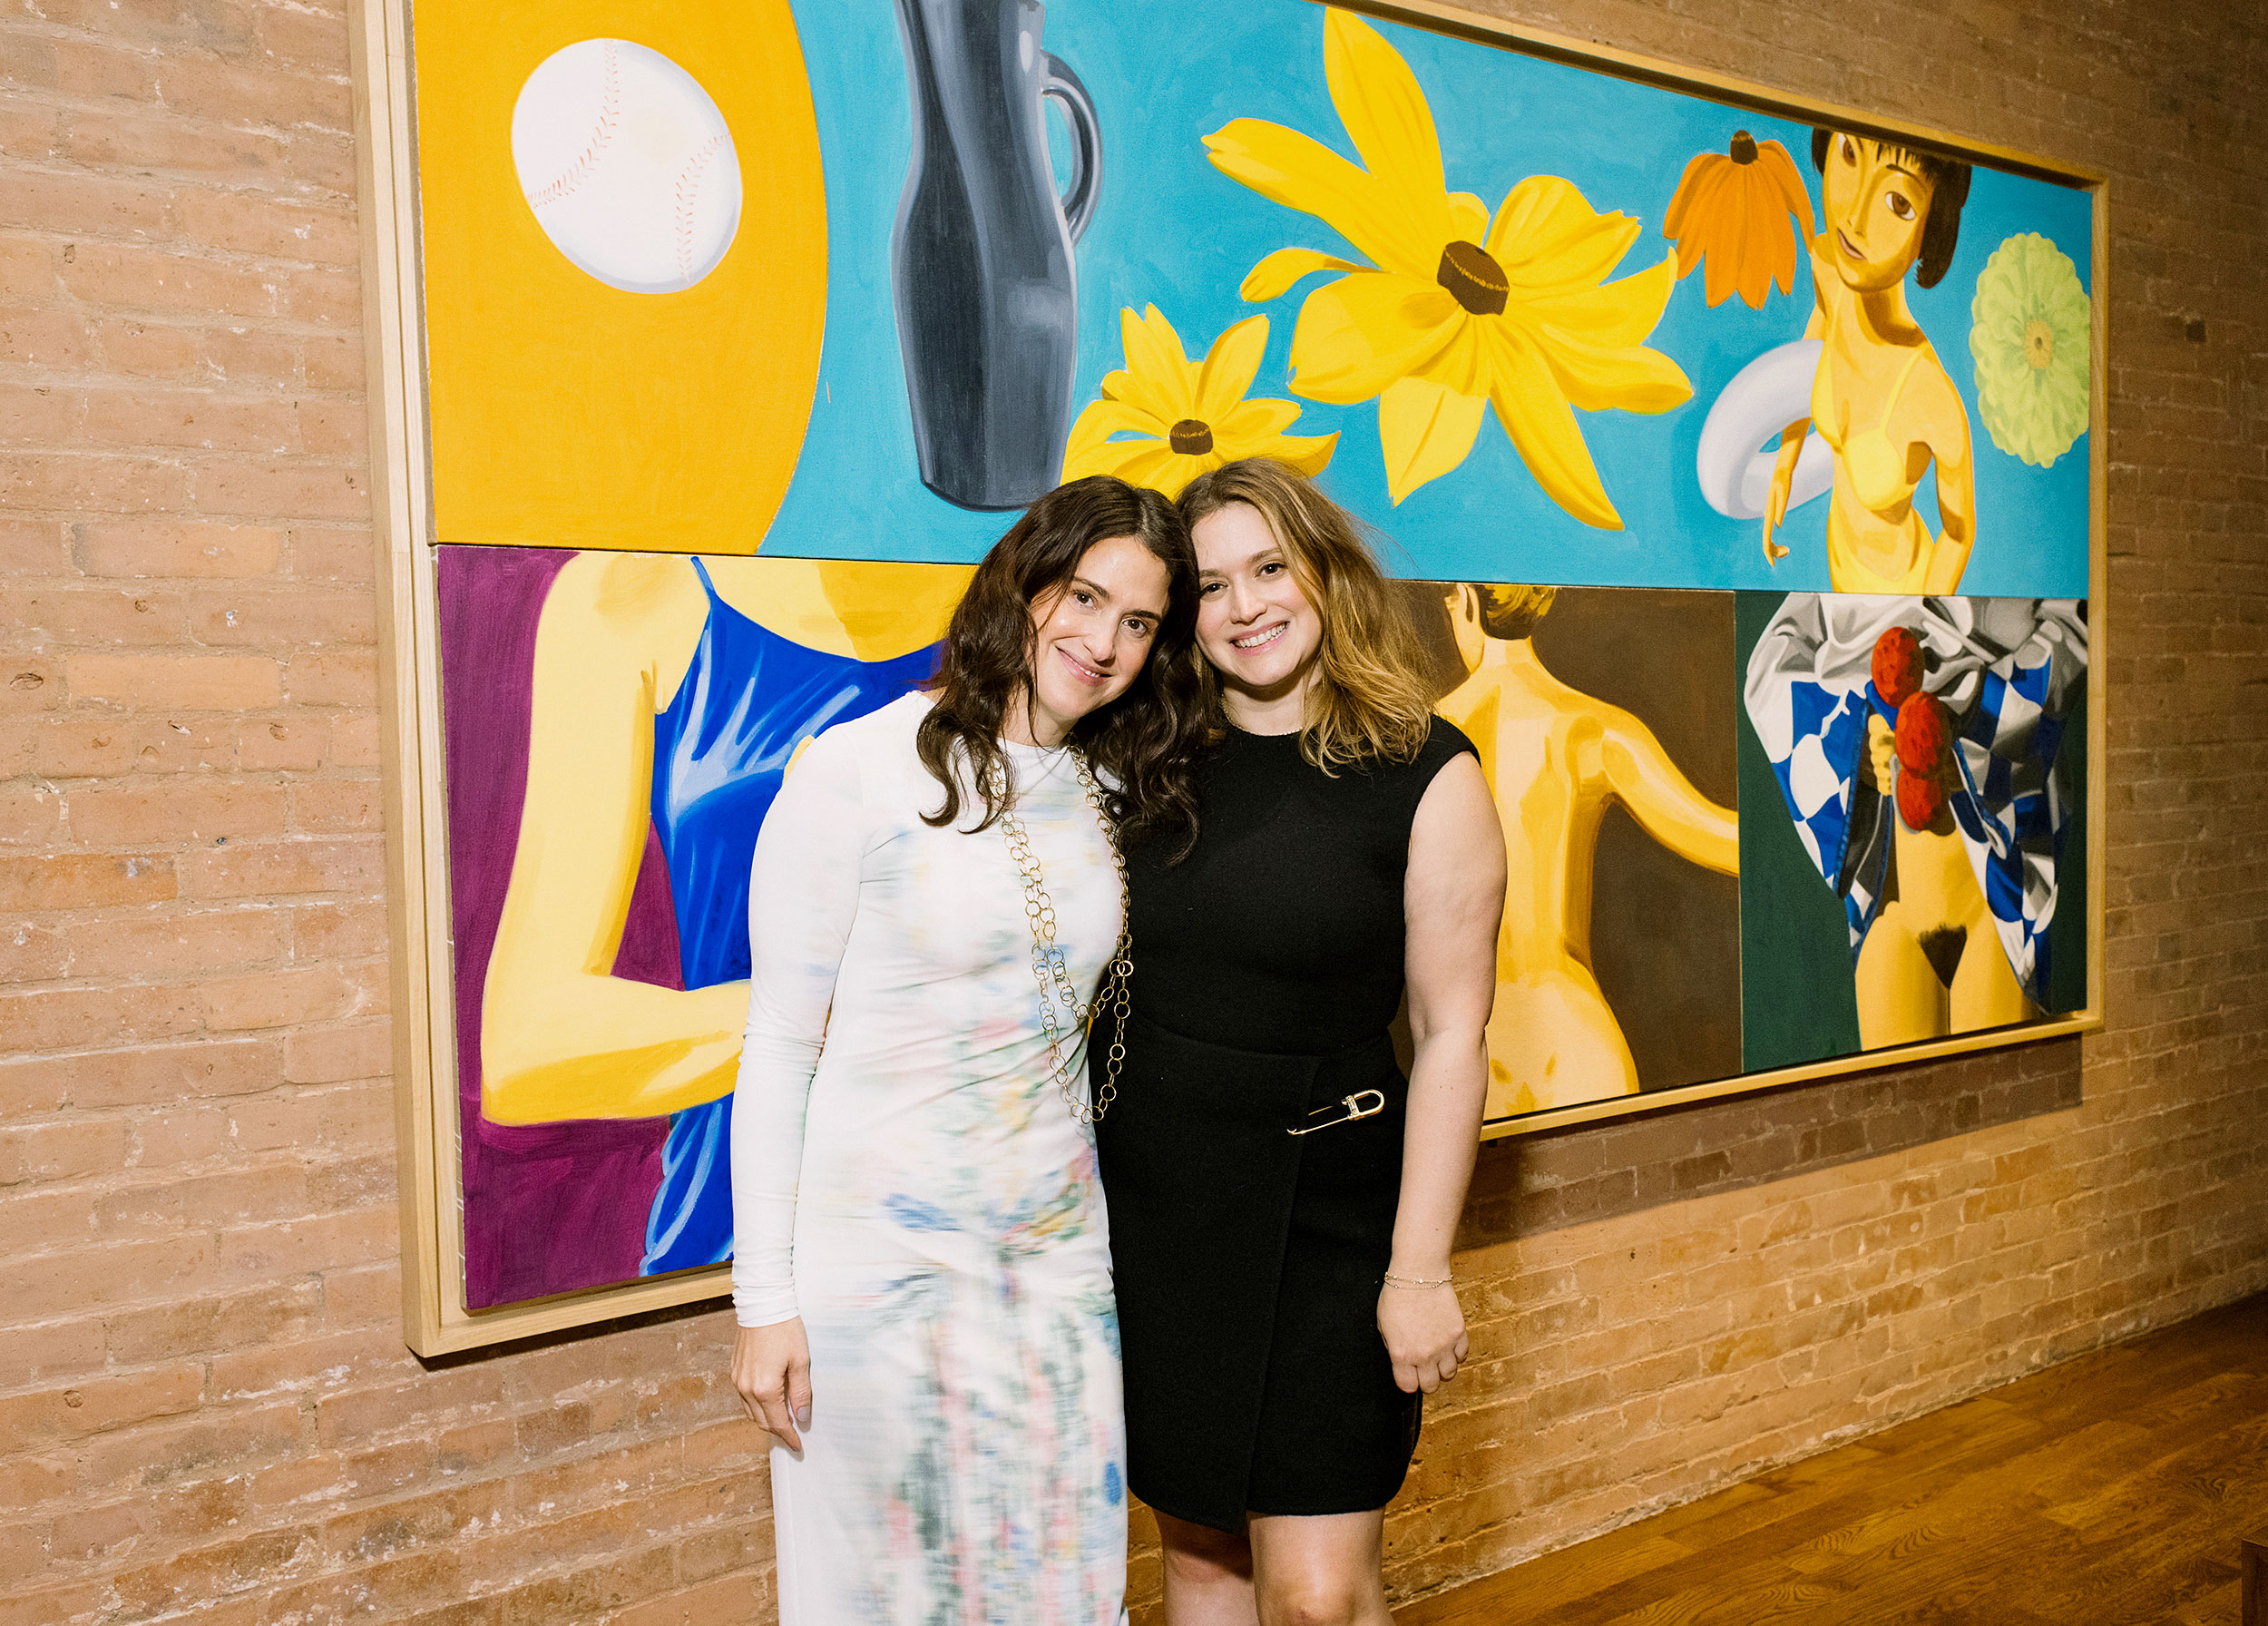 The Mathews Sisters Shed Light on Their Family’s Art Collection